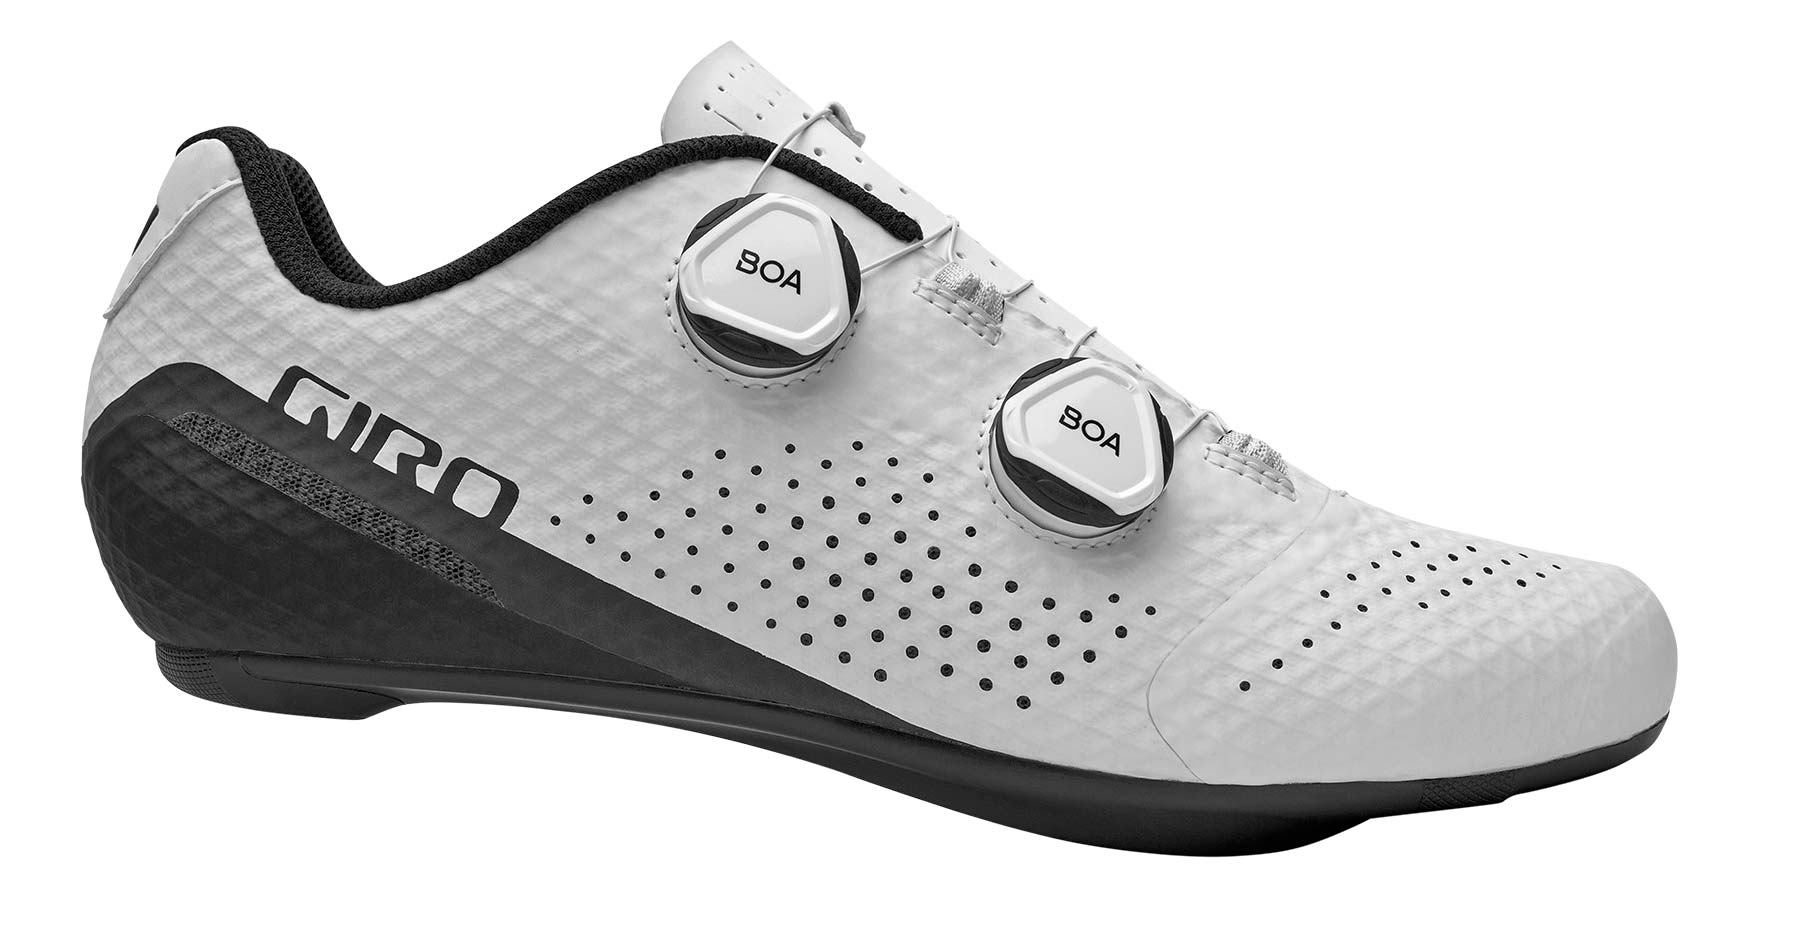 Giro-Regime-high-performance-road-shoes-at-a-mid-level-price_white-side.jpg